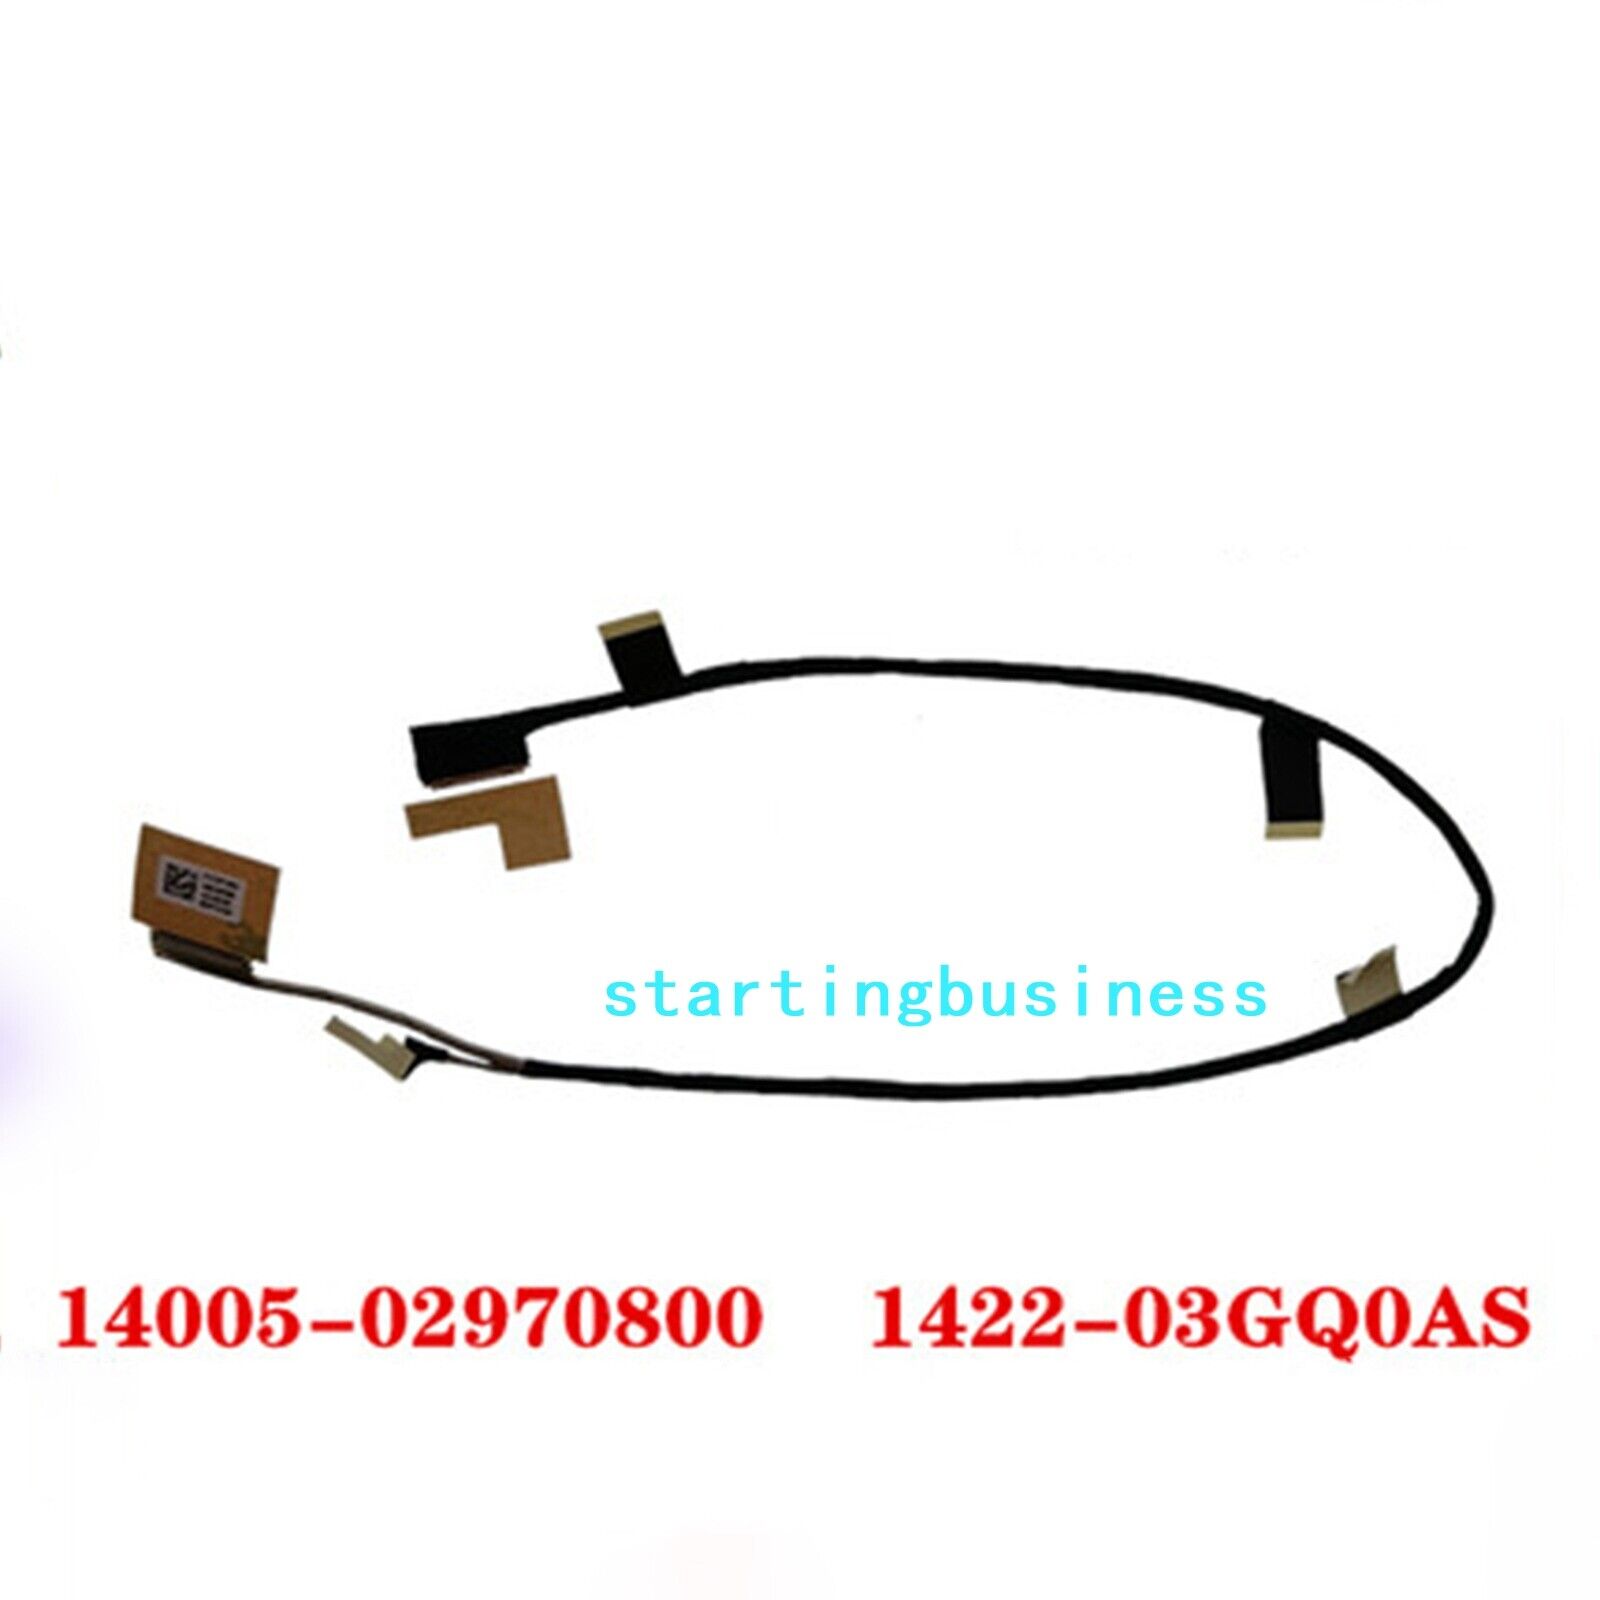 1pc Screen Cable for ASUS VIVOBOOK 17 X712/FA/FB 14005-02970800 1422-03GQ0AS